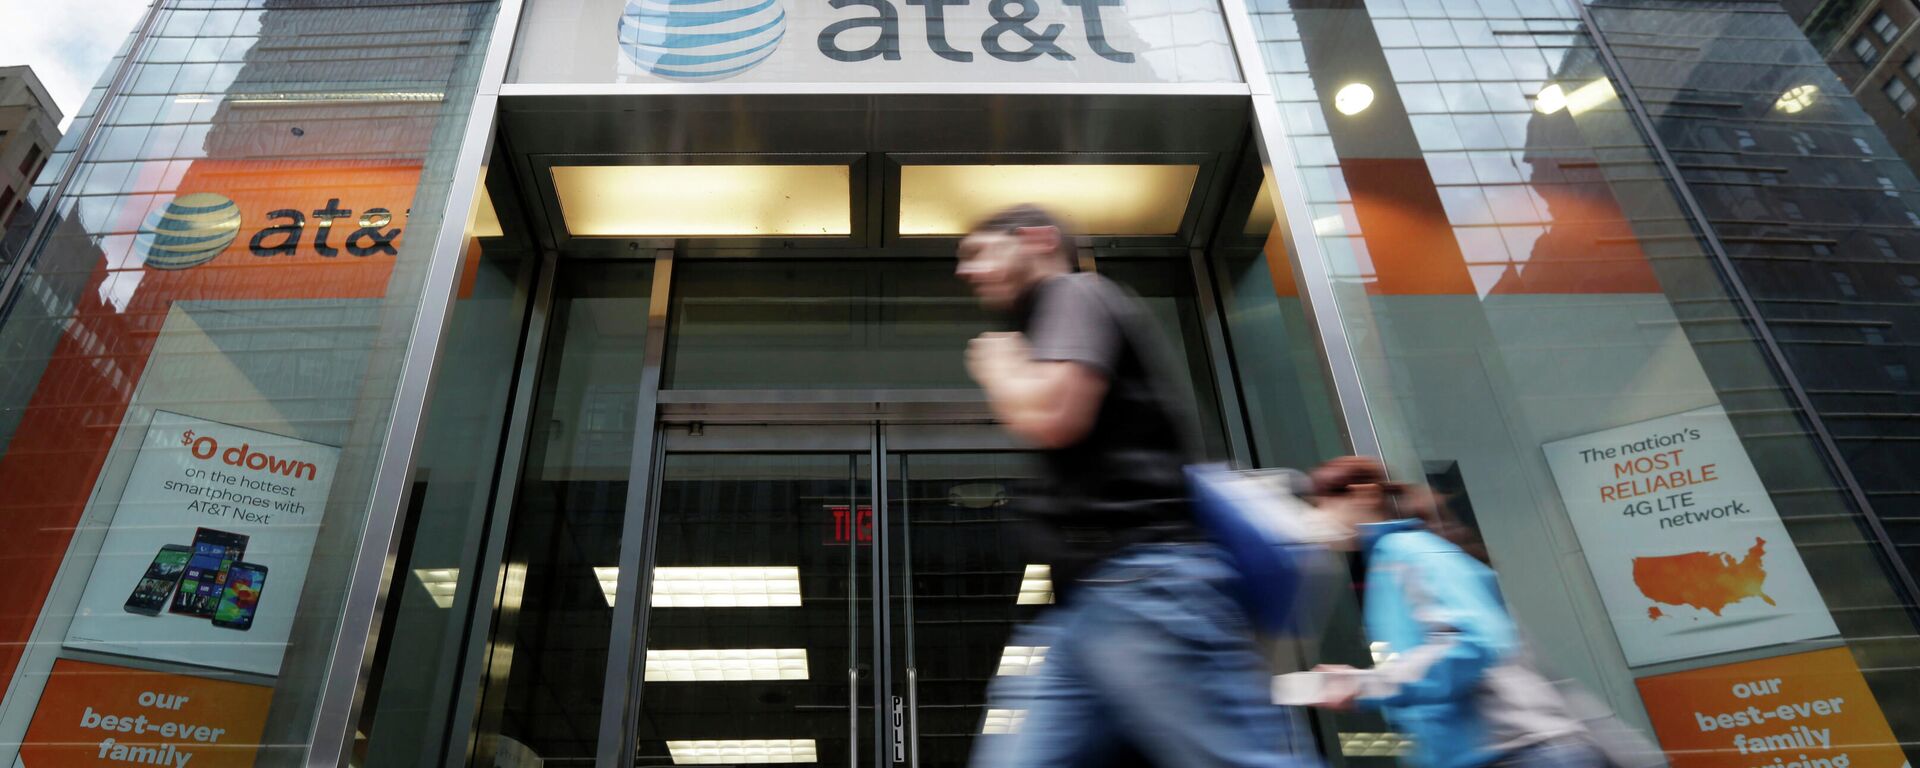 FILE - In this Oct. 21, 2014, file photo, people pass an AT&T store along New York's Madison Avenue. The nation's largest cellphone providers will pay a combined $116 million under a settlement approved Thursday, Sept. 24, 2020, in a California lawsuit alleging that they overcharged government customers for wireless services over more than a decade. Verizon will pay $68 million and AT&T Mobility $48 million to settle claims that they violated cost-saving agreements with nearly 300 state and local governments.  - Sputnik International, 1920, 04.01.2022